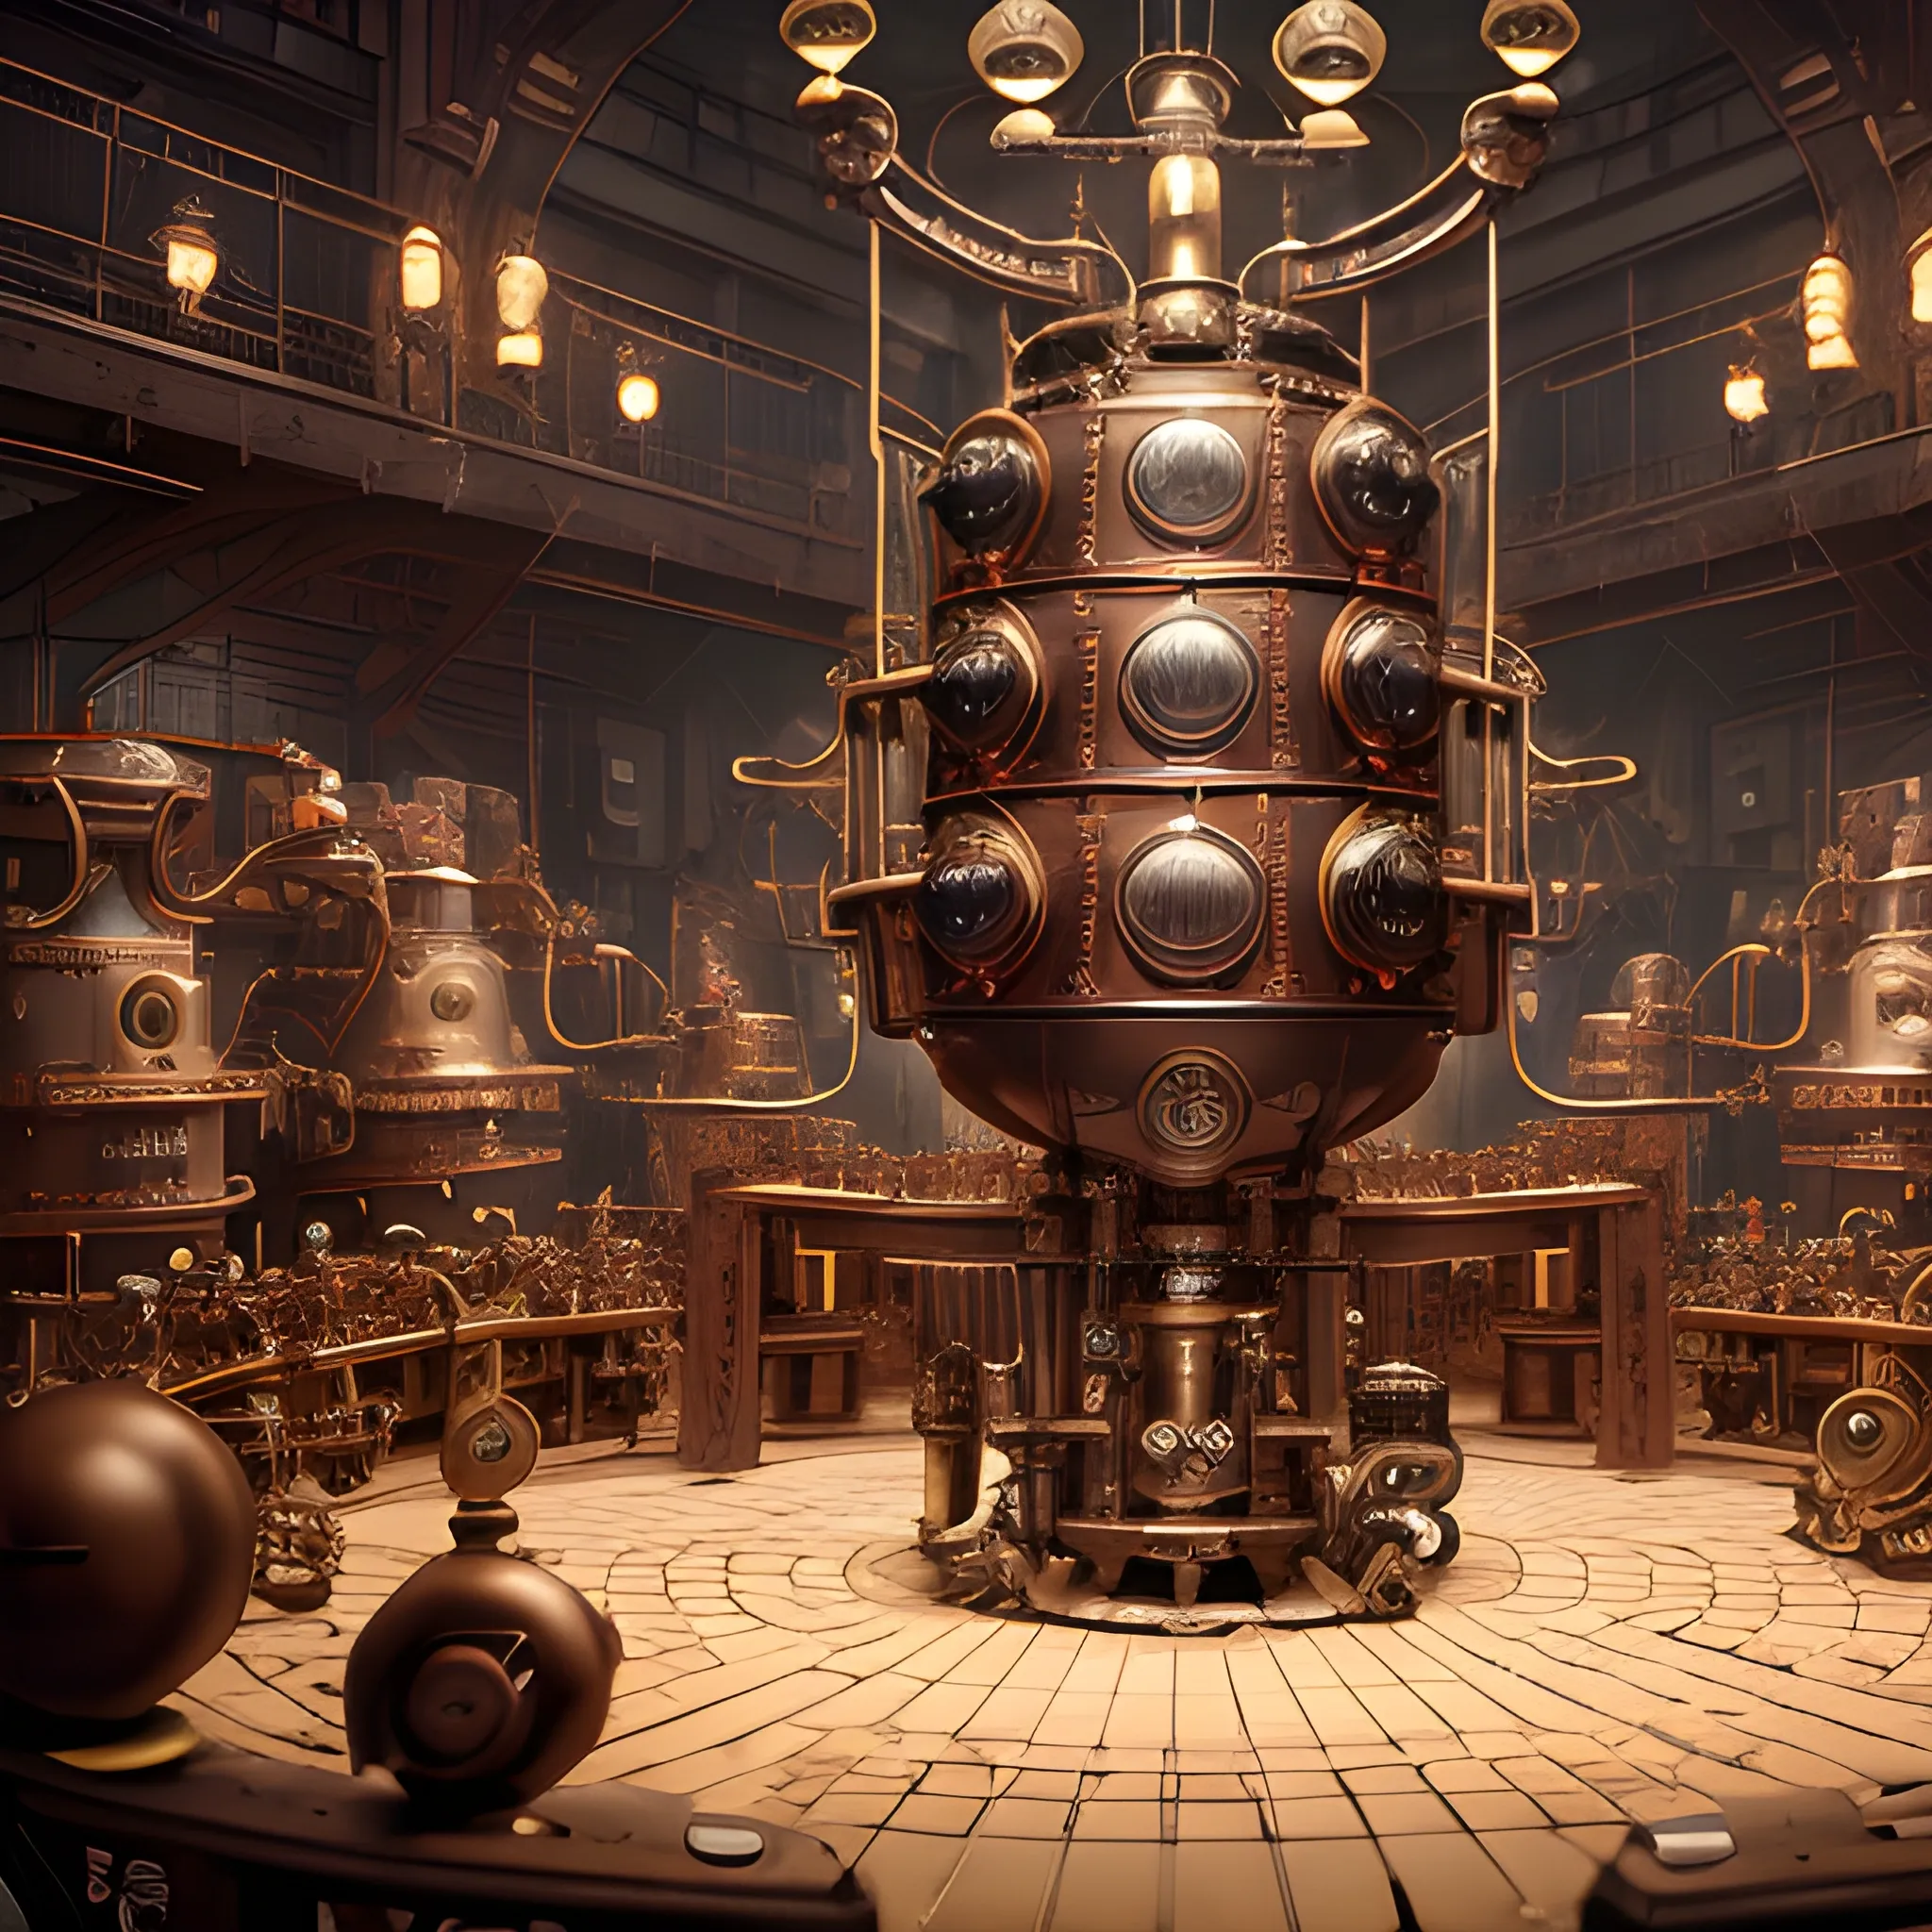 8k, Masterpiece, steampunk chocolate factory overflowing with chocolate fountain, chocolate assembly lines, matte, award-winning, cinematic quality, photorealism
